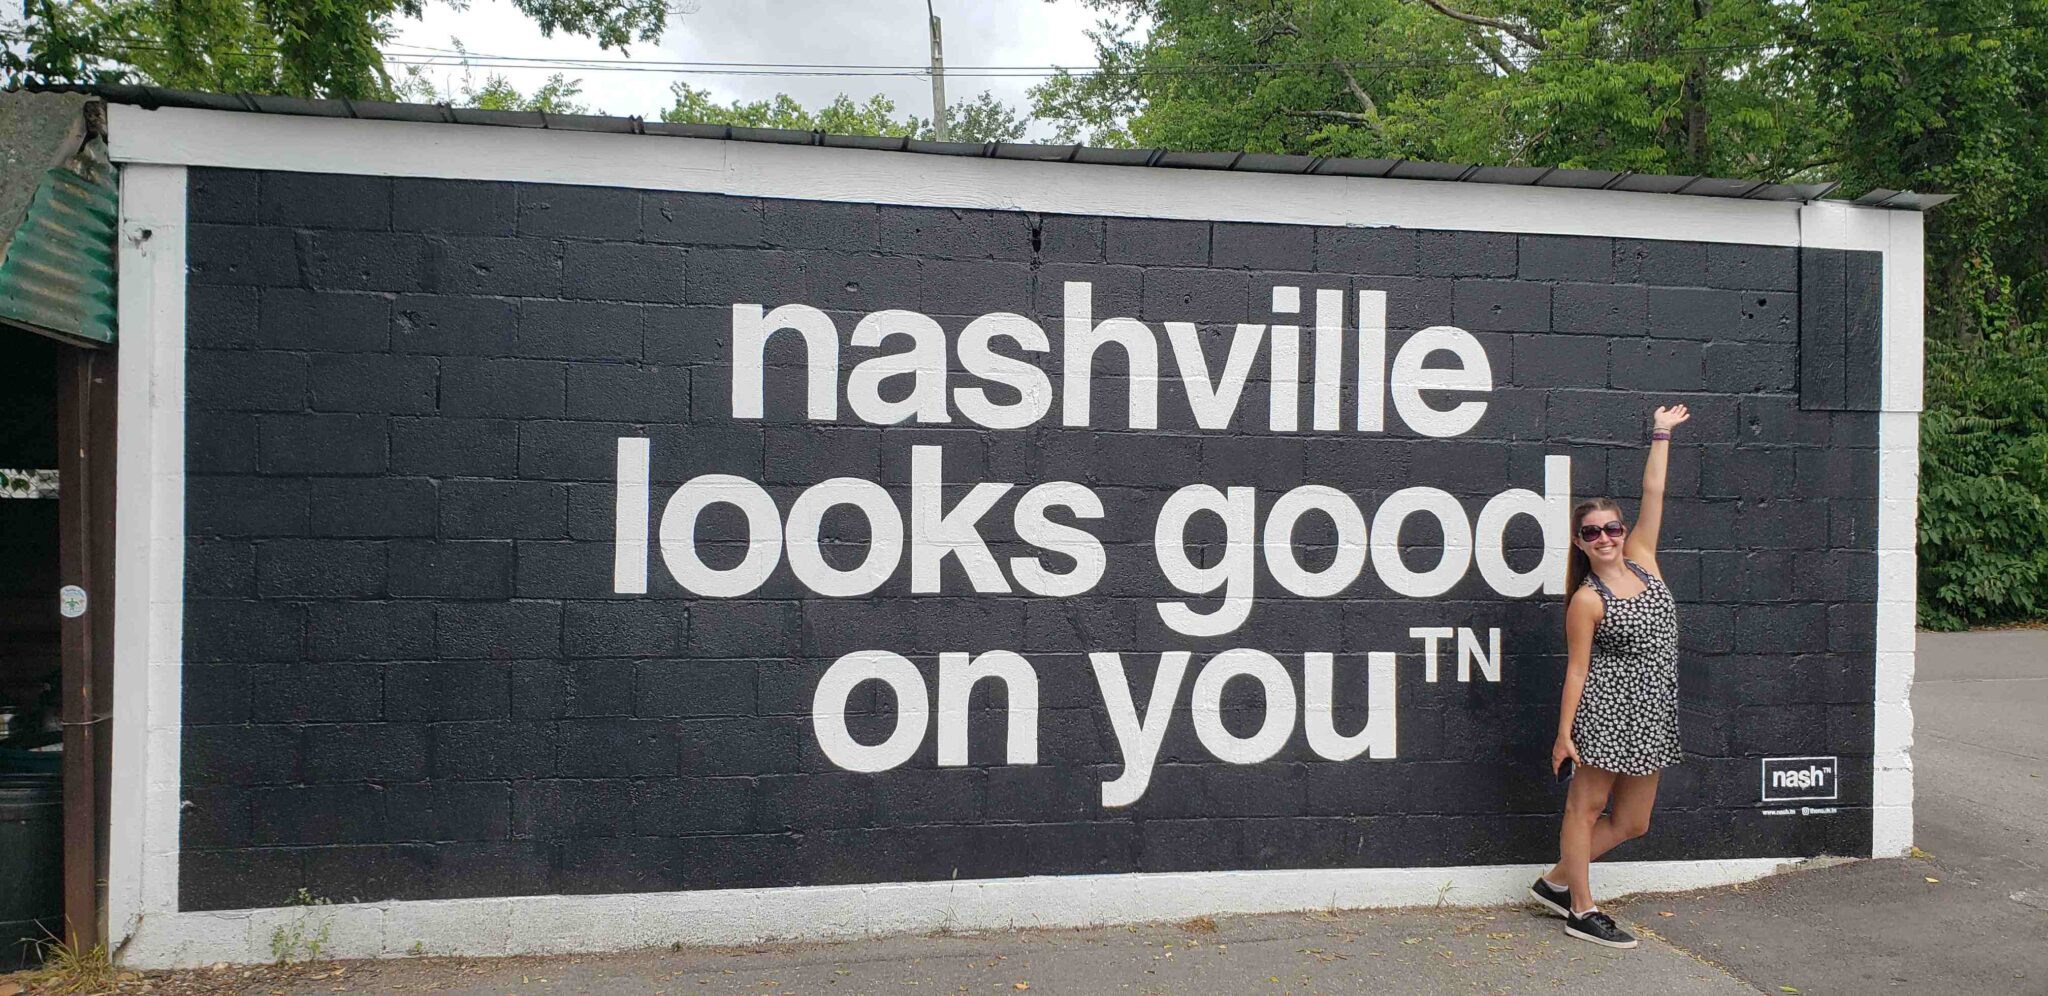 nashville looks good on you - posing for picture